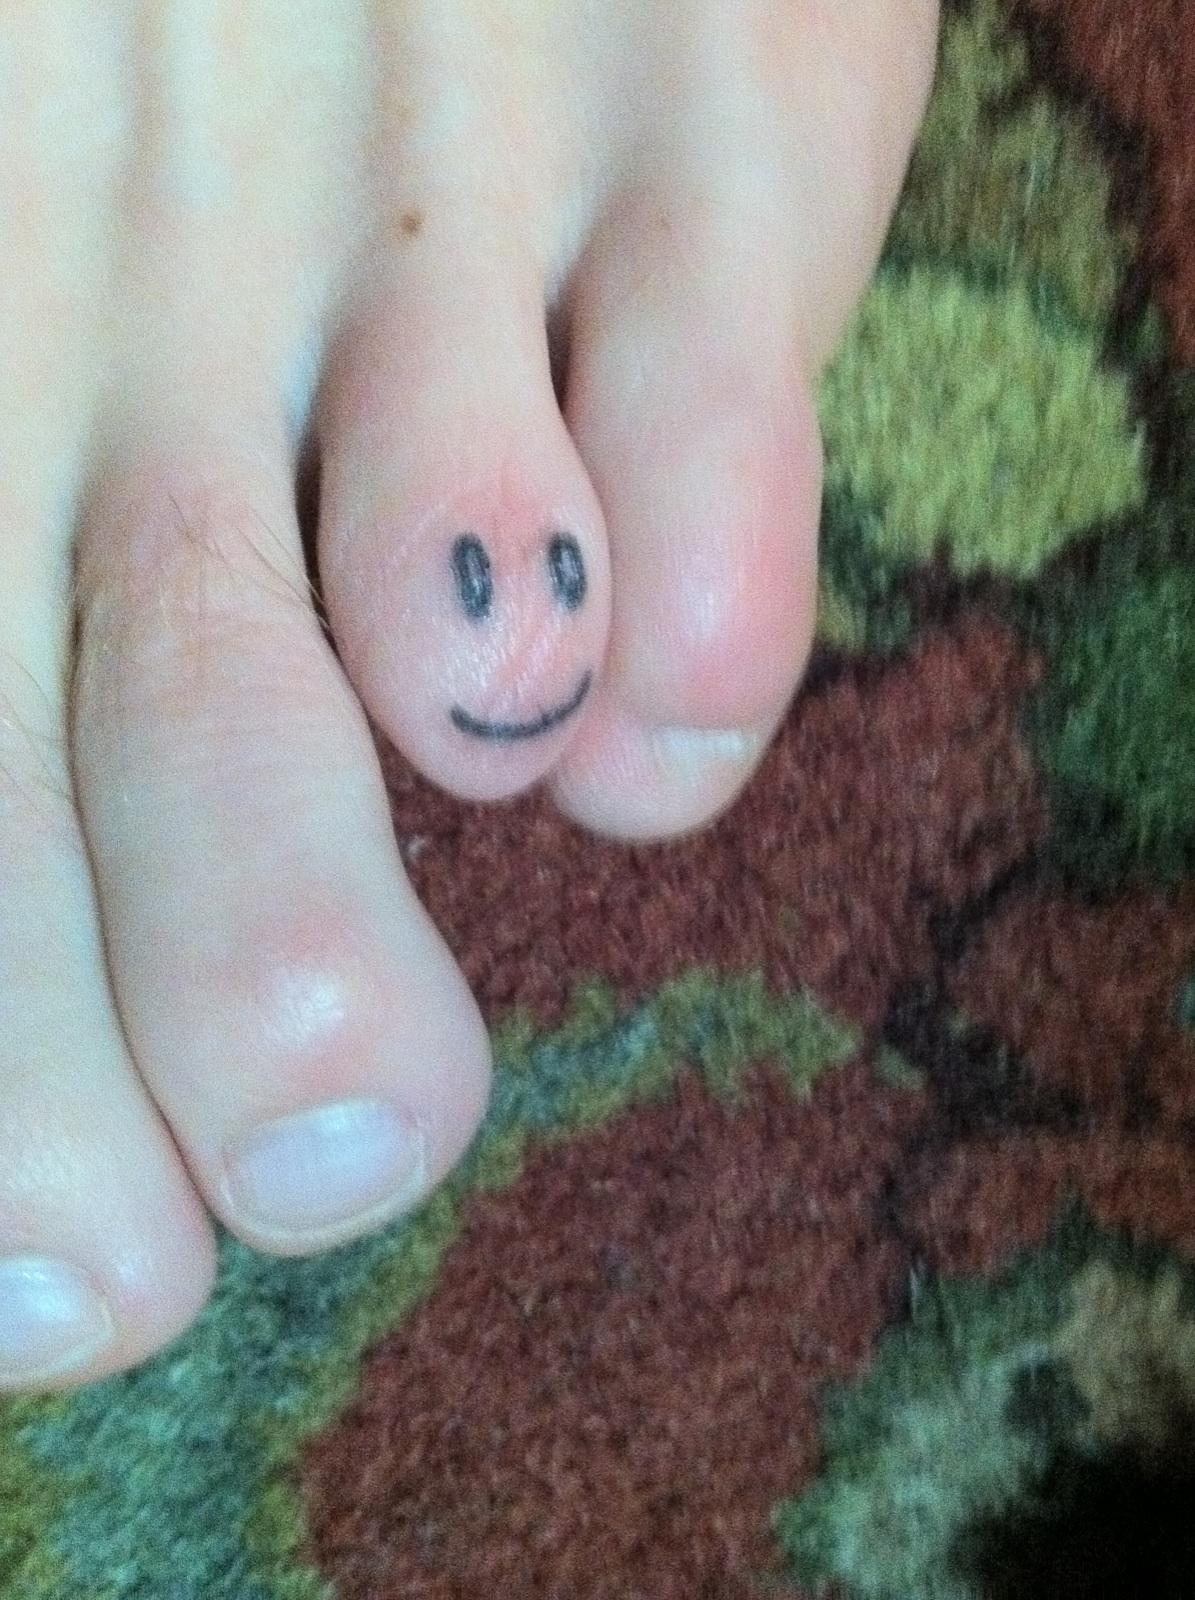 I cut my Brother's toe off when we were kids.  It was an accident.  He could not have gotten this tat without me.